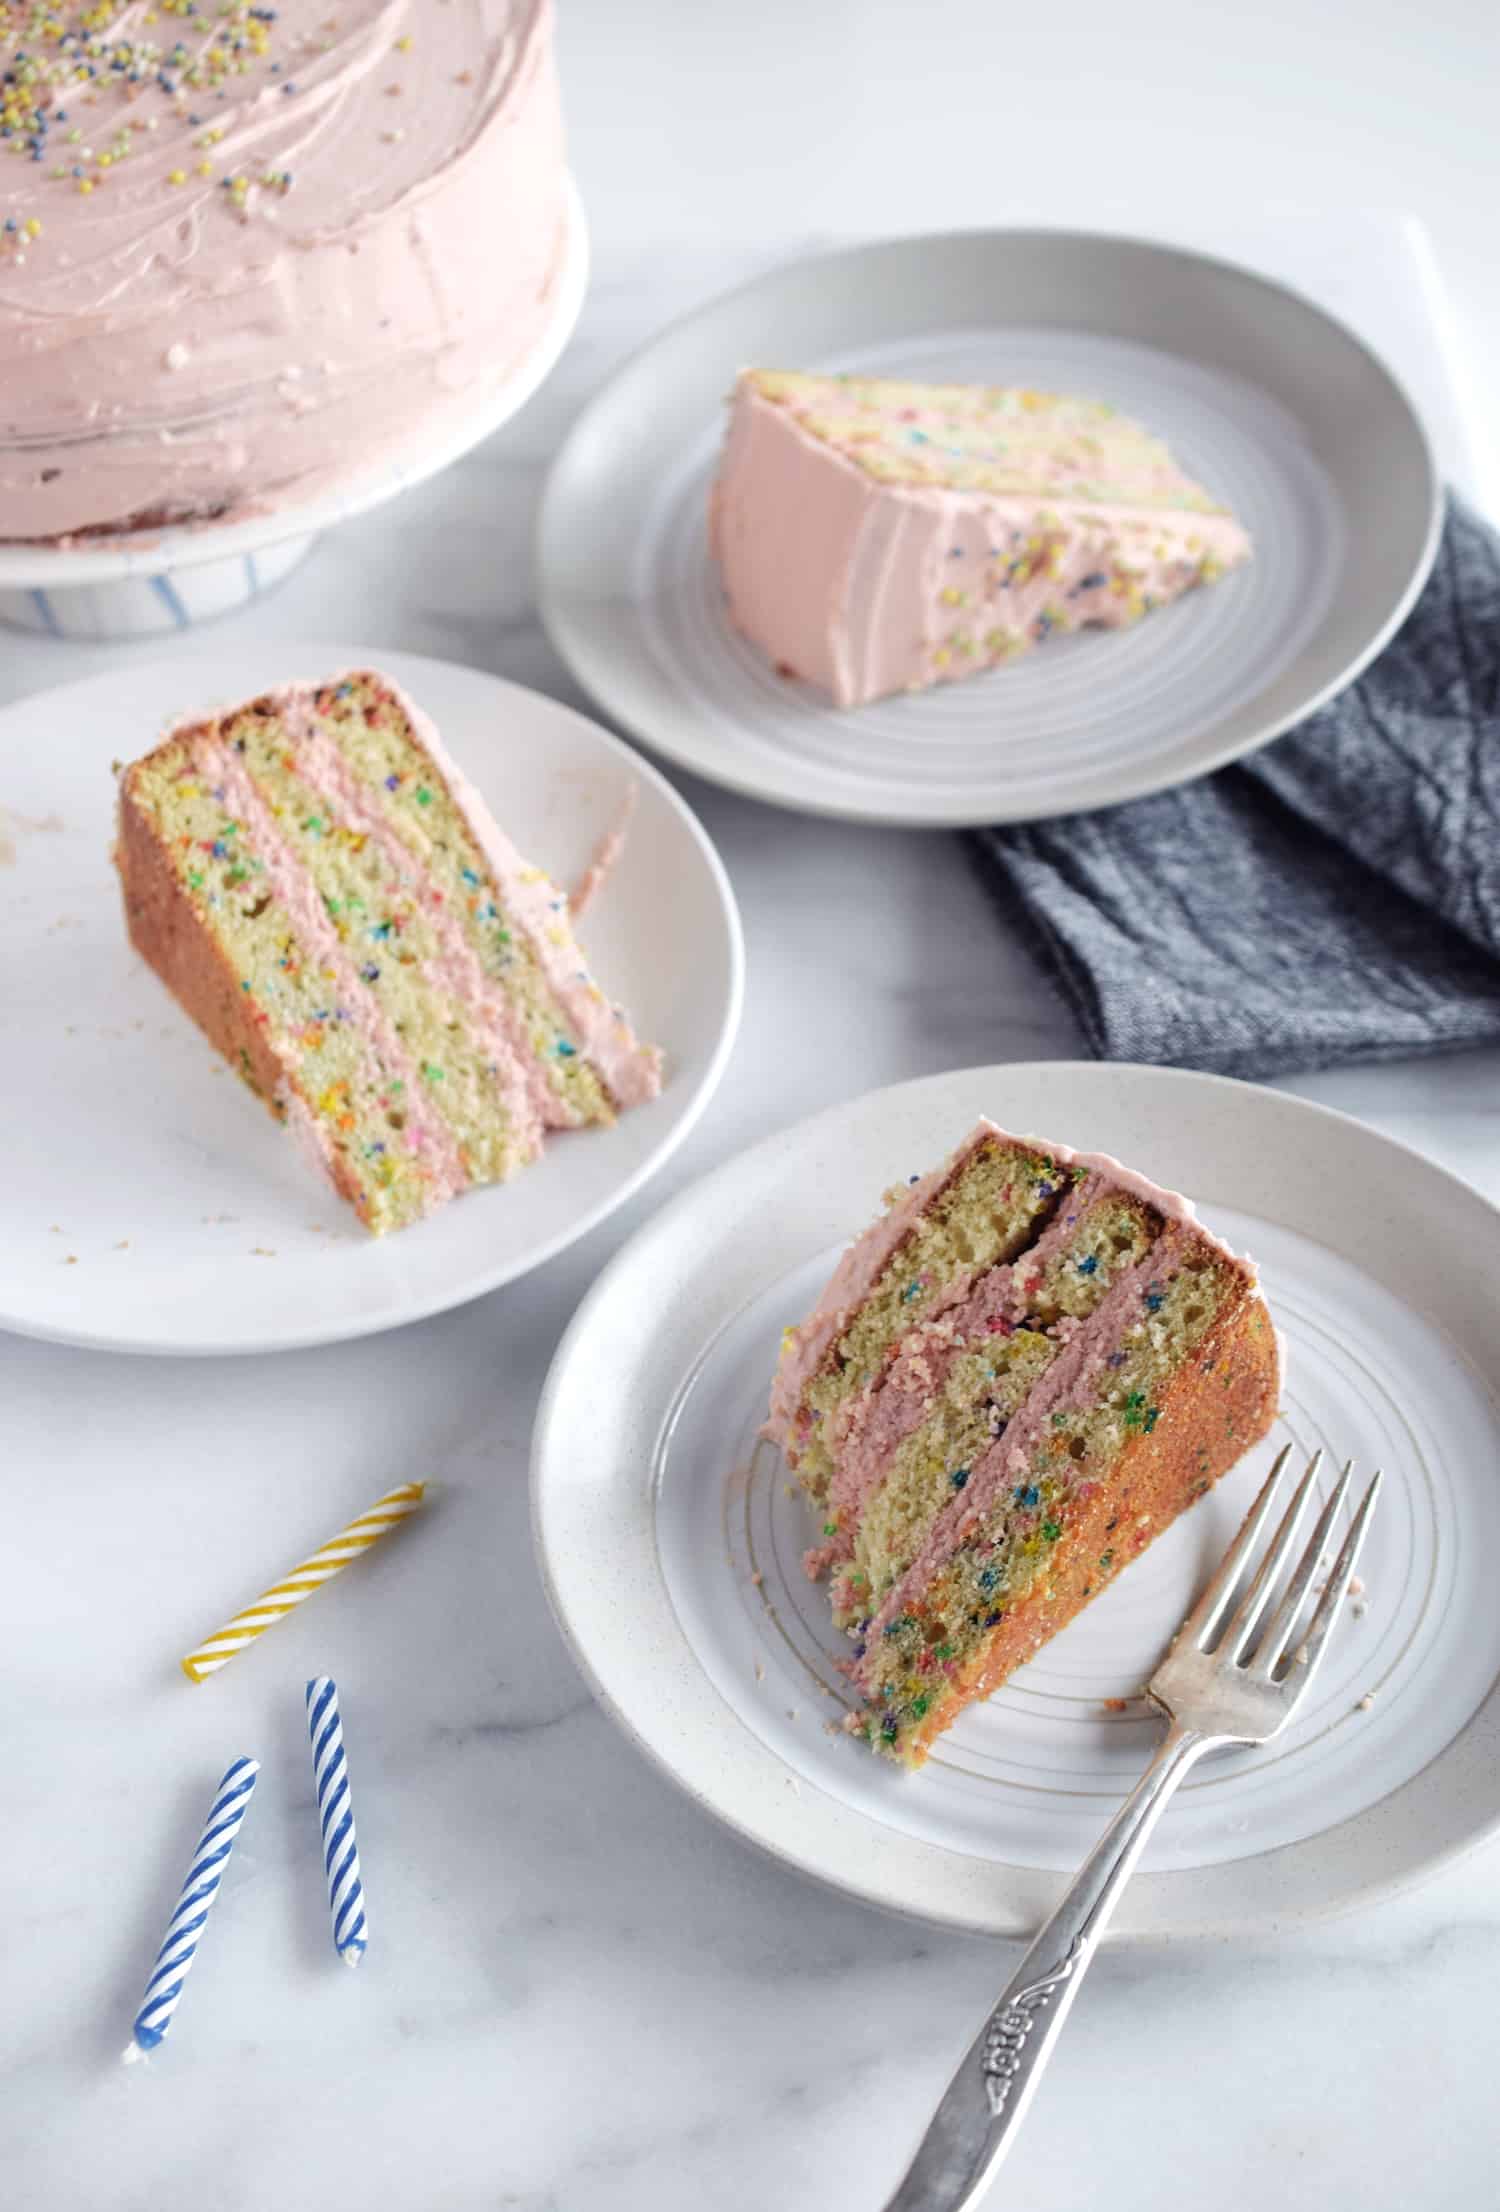 Funfetti Cake with White Chocolate Topping - Sweet and Savory Meals